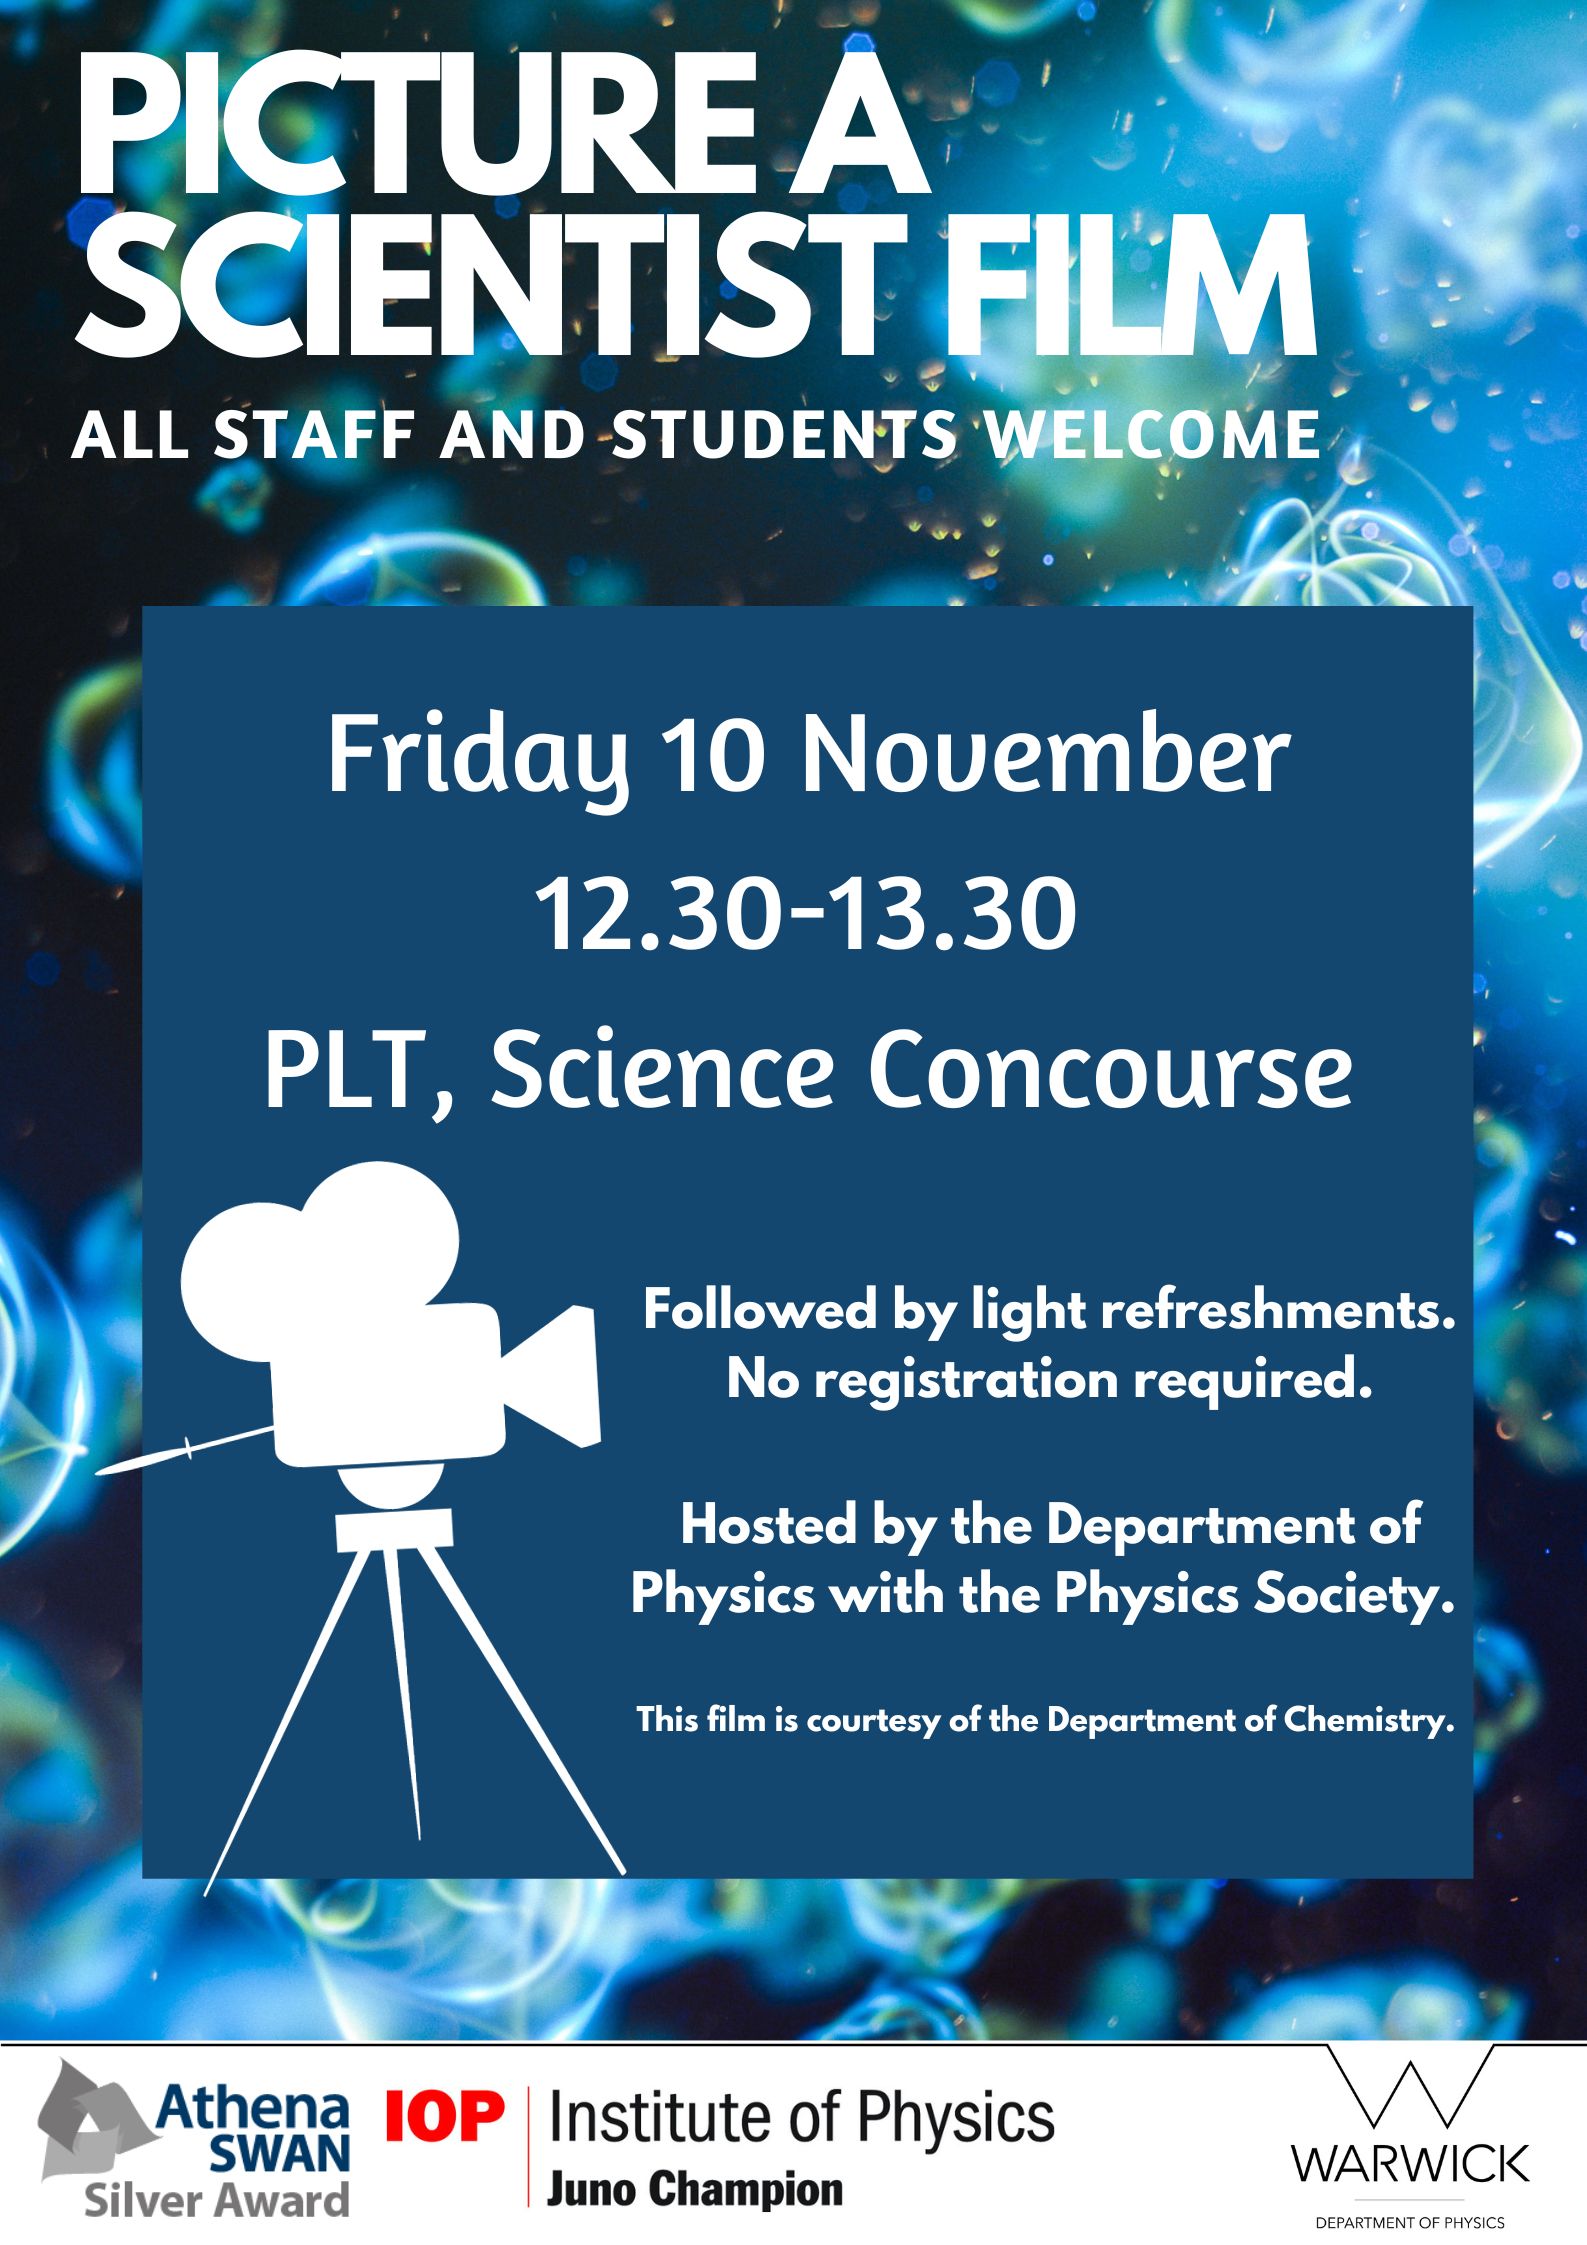 Picture a Scientist film, Friday 10 November, 12.30-1.30pm, PLT Science Concourse. Followed by light refreshments, no registration required.